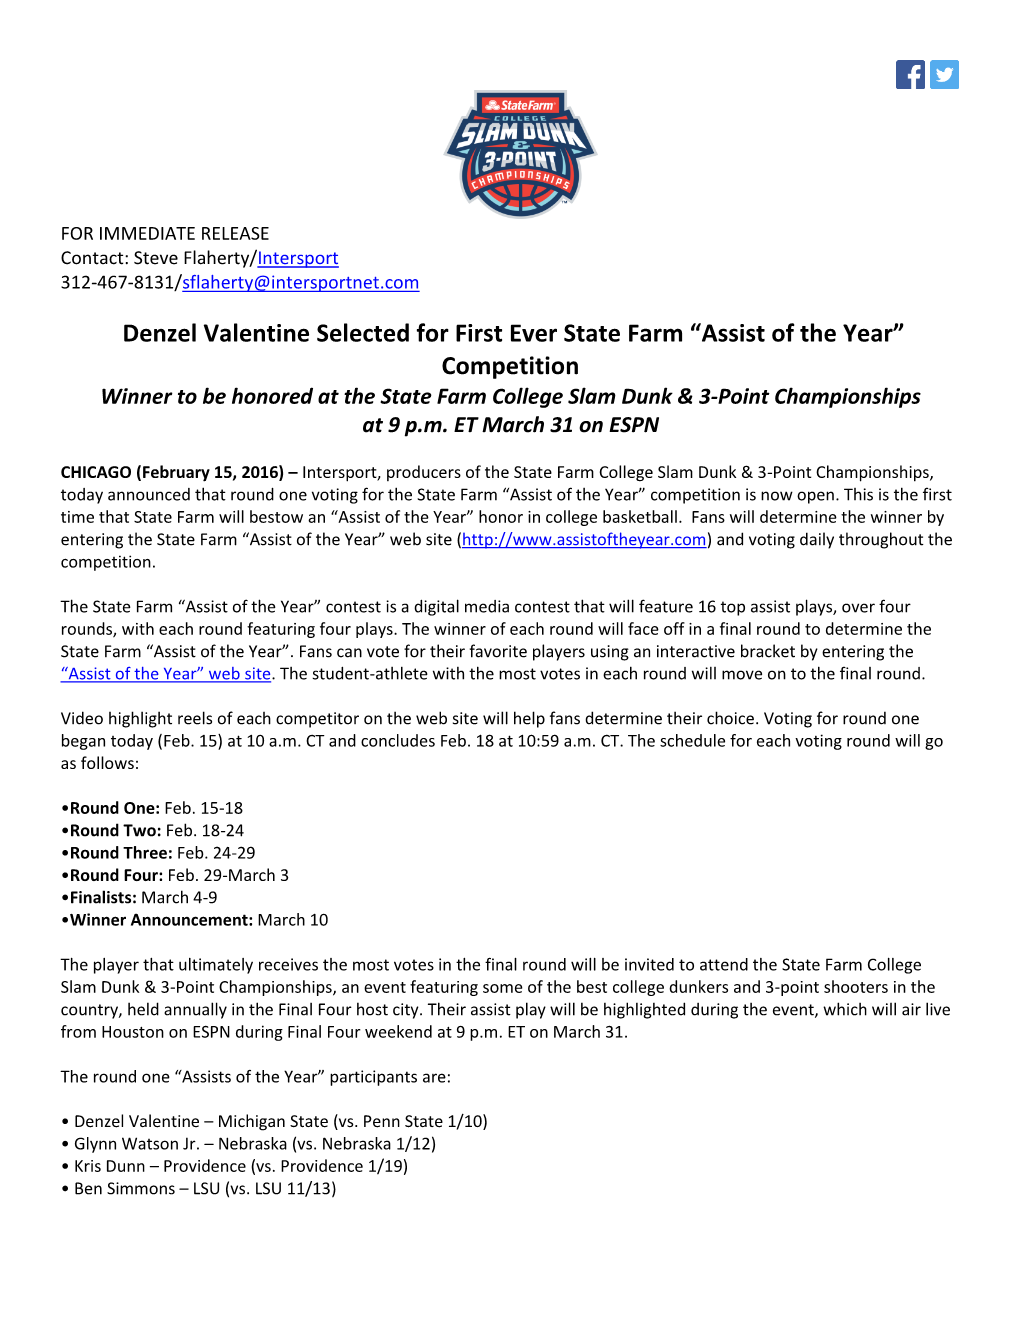 Denzel Valentine Selected for First Ever State Farm “Assist of the Year